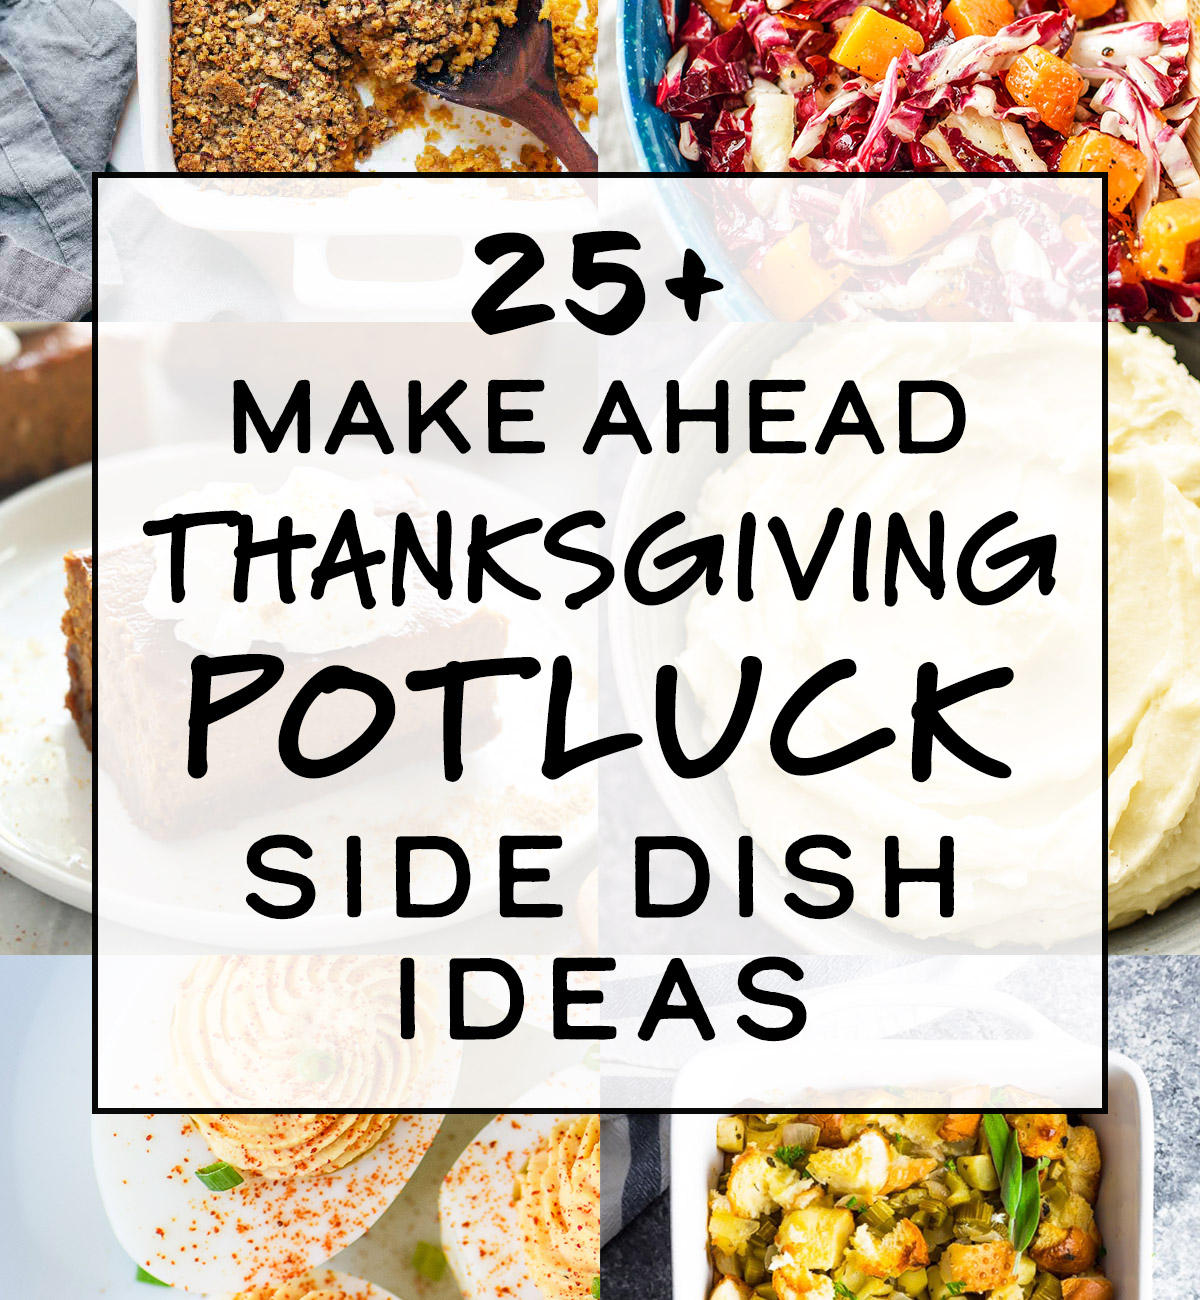 25 Make Ahead Thanksgiving Potluck Side Dish Ideas Project Meal Plan,Bathroom Cabinet Colors 2019